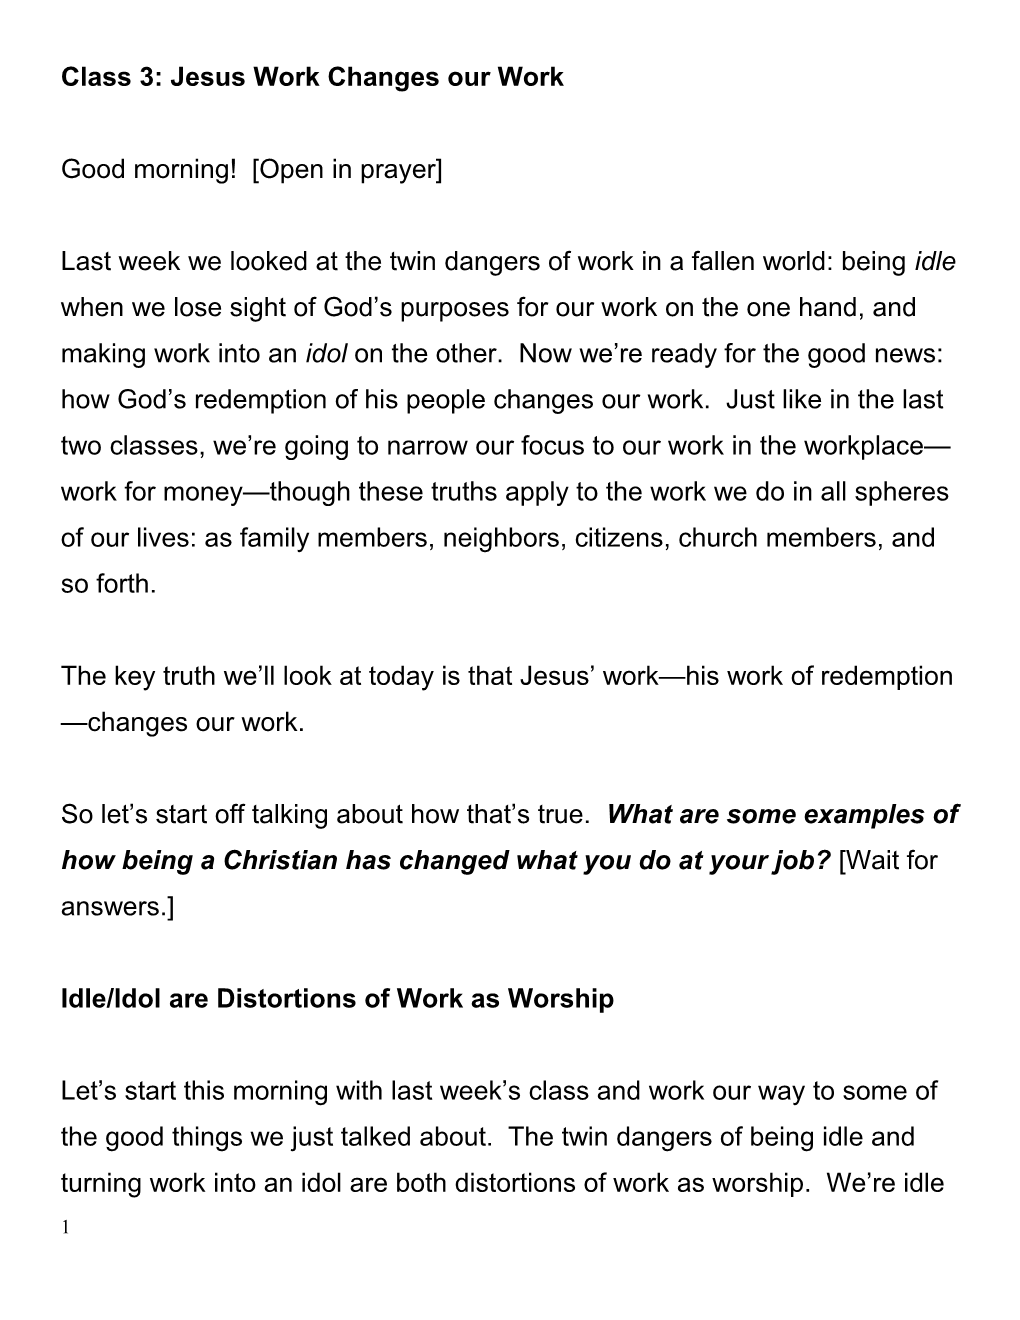 Class 3: Jesus Work Changes Our Work